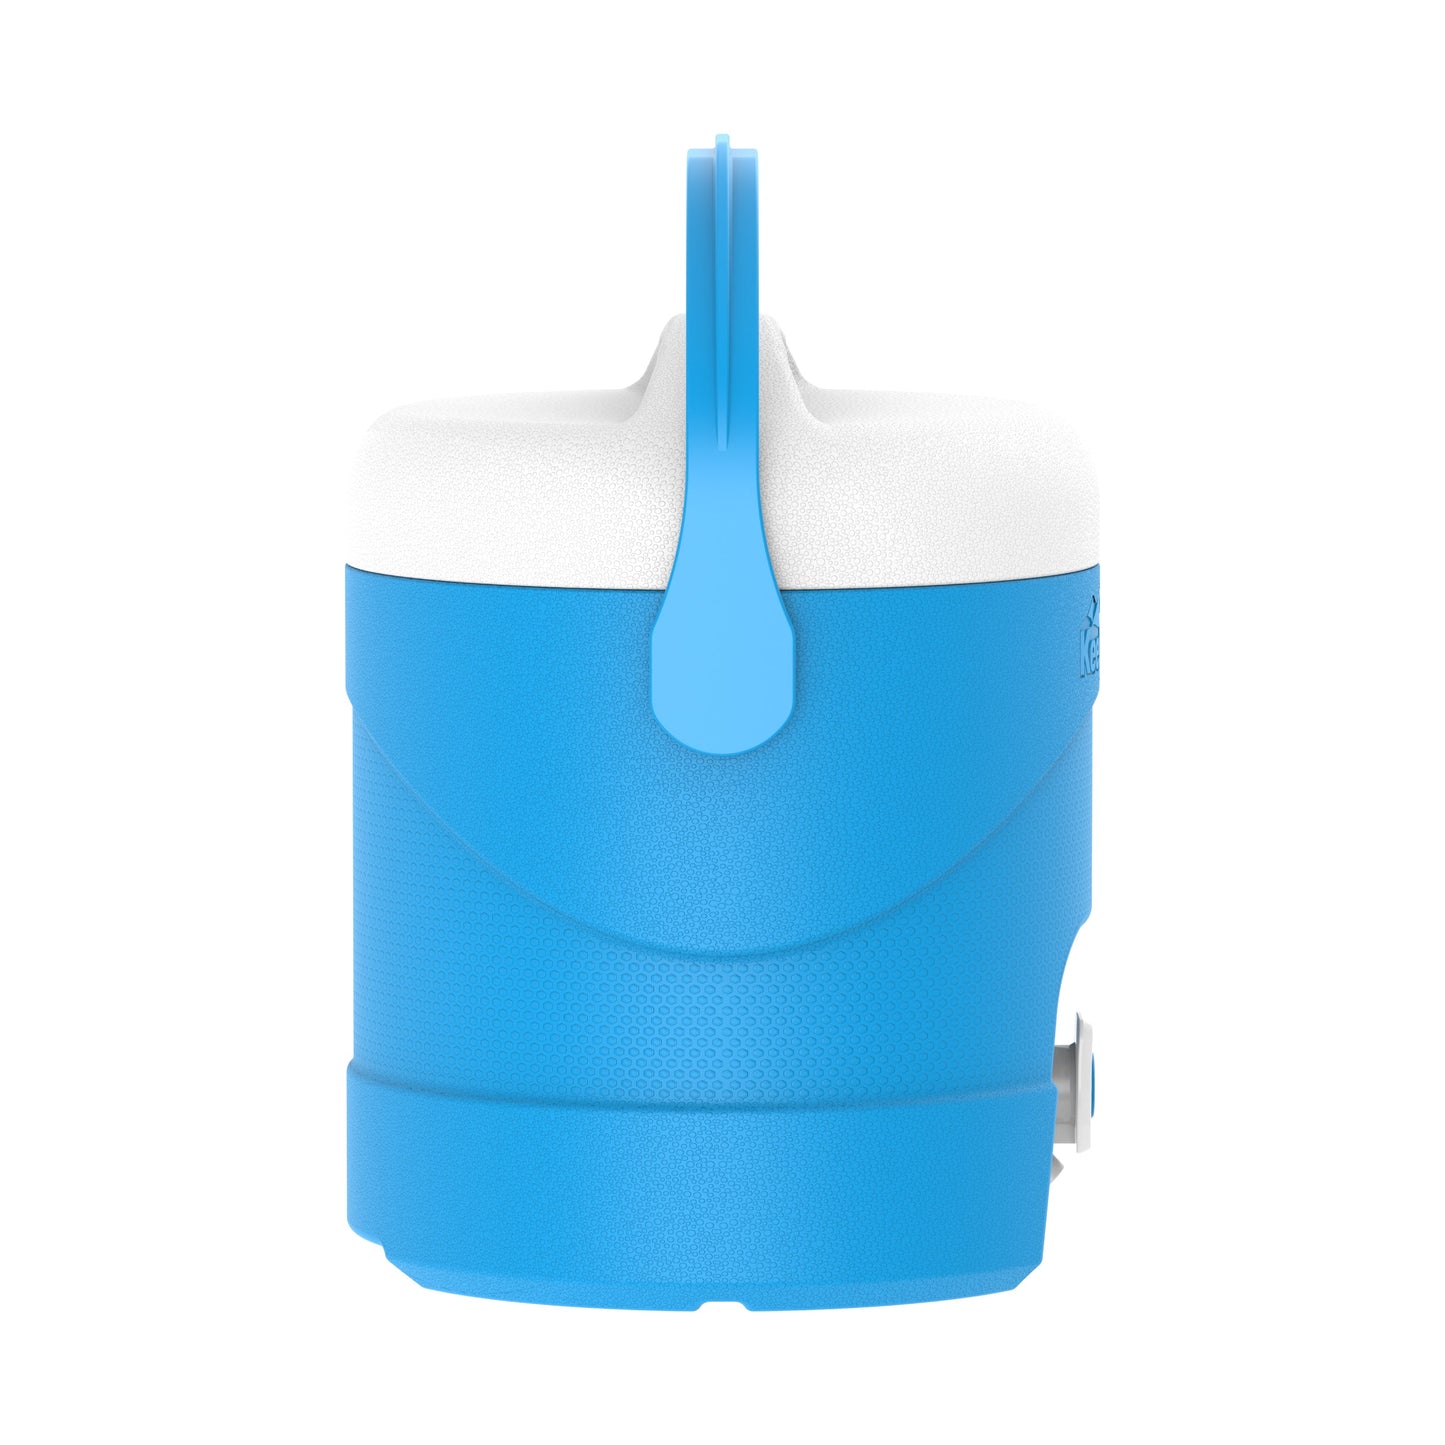 4L KeepCold Picnic Water Cooler - Cosmoplast Kuwait